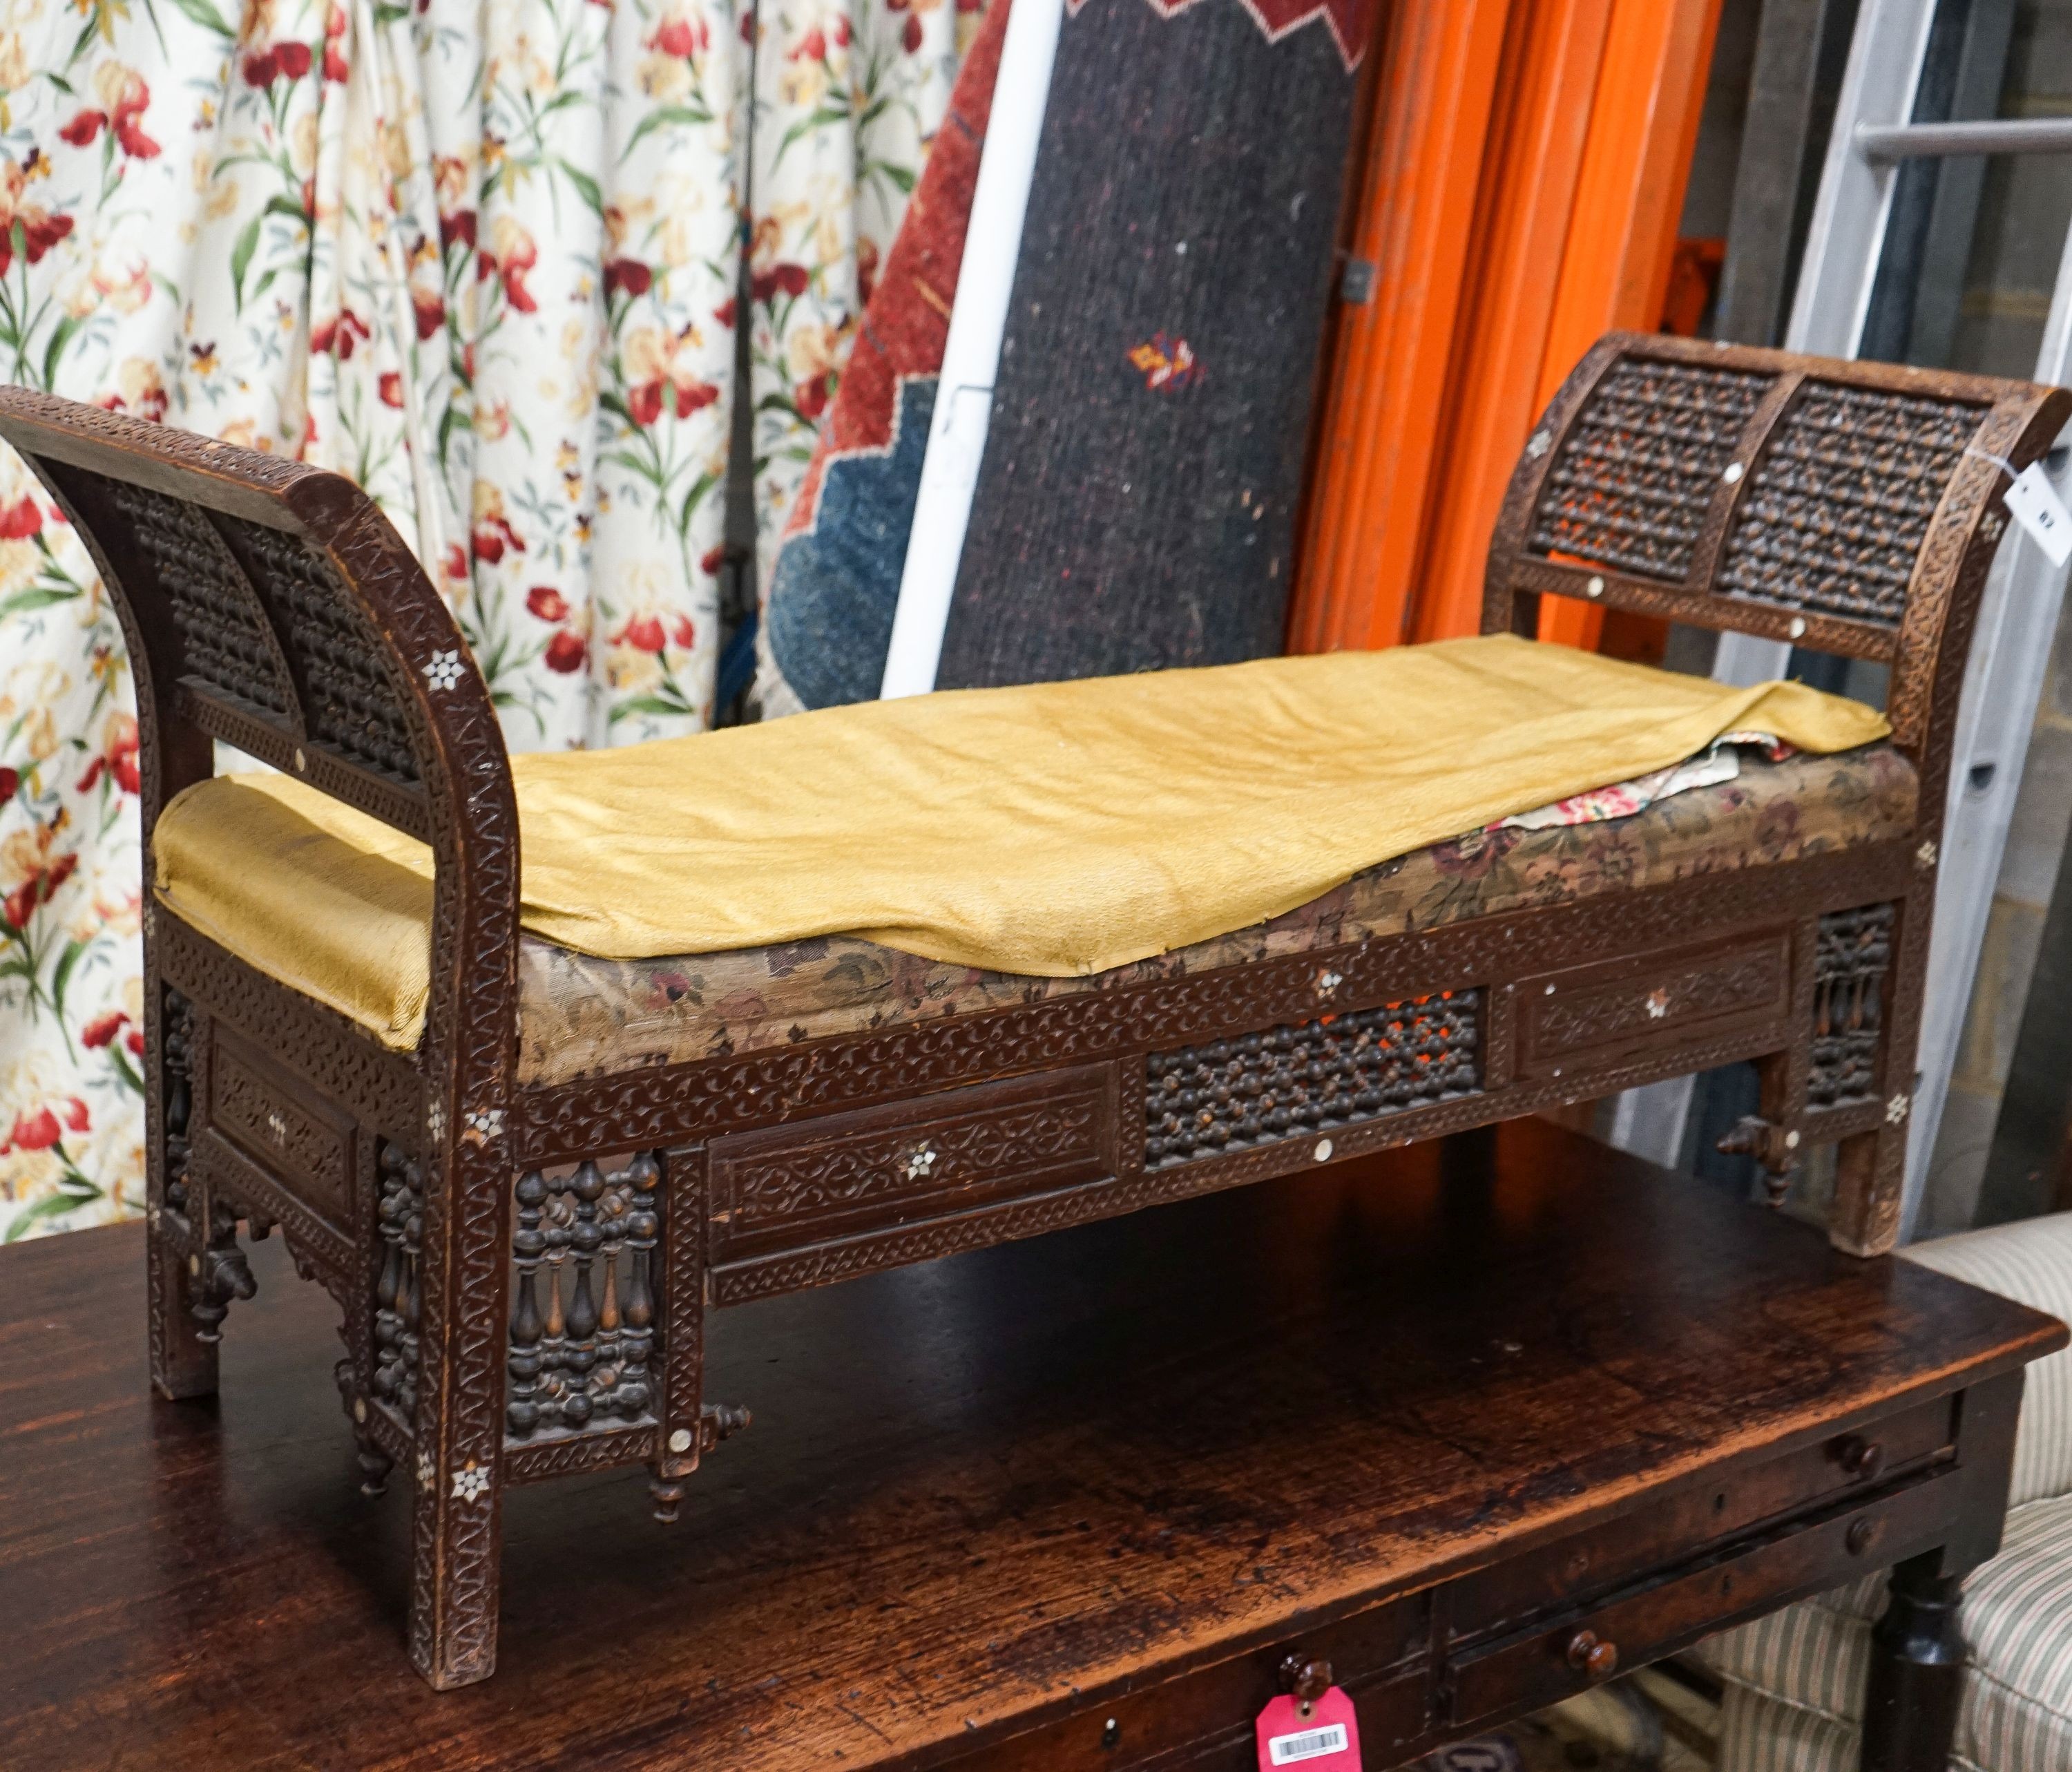 An early 20th century Moorish mother of pearl inlaid carved hardwood window seat, length 134cm, depth 44cm, height 64cm